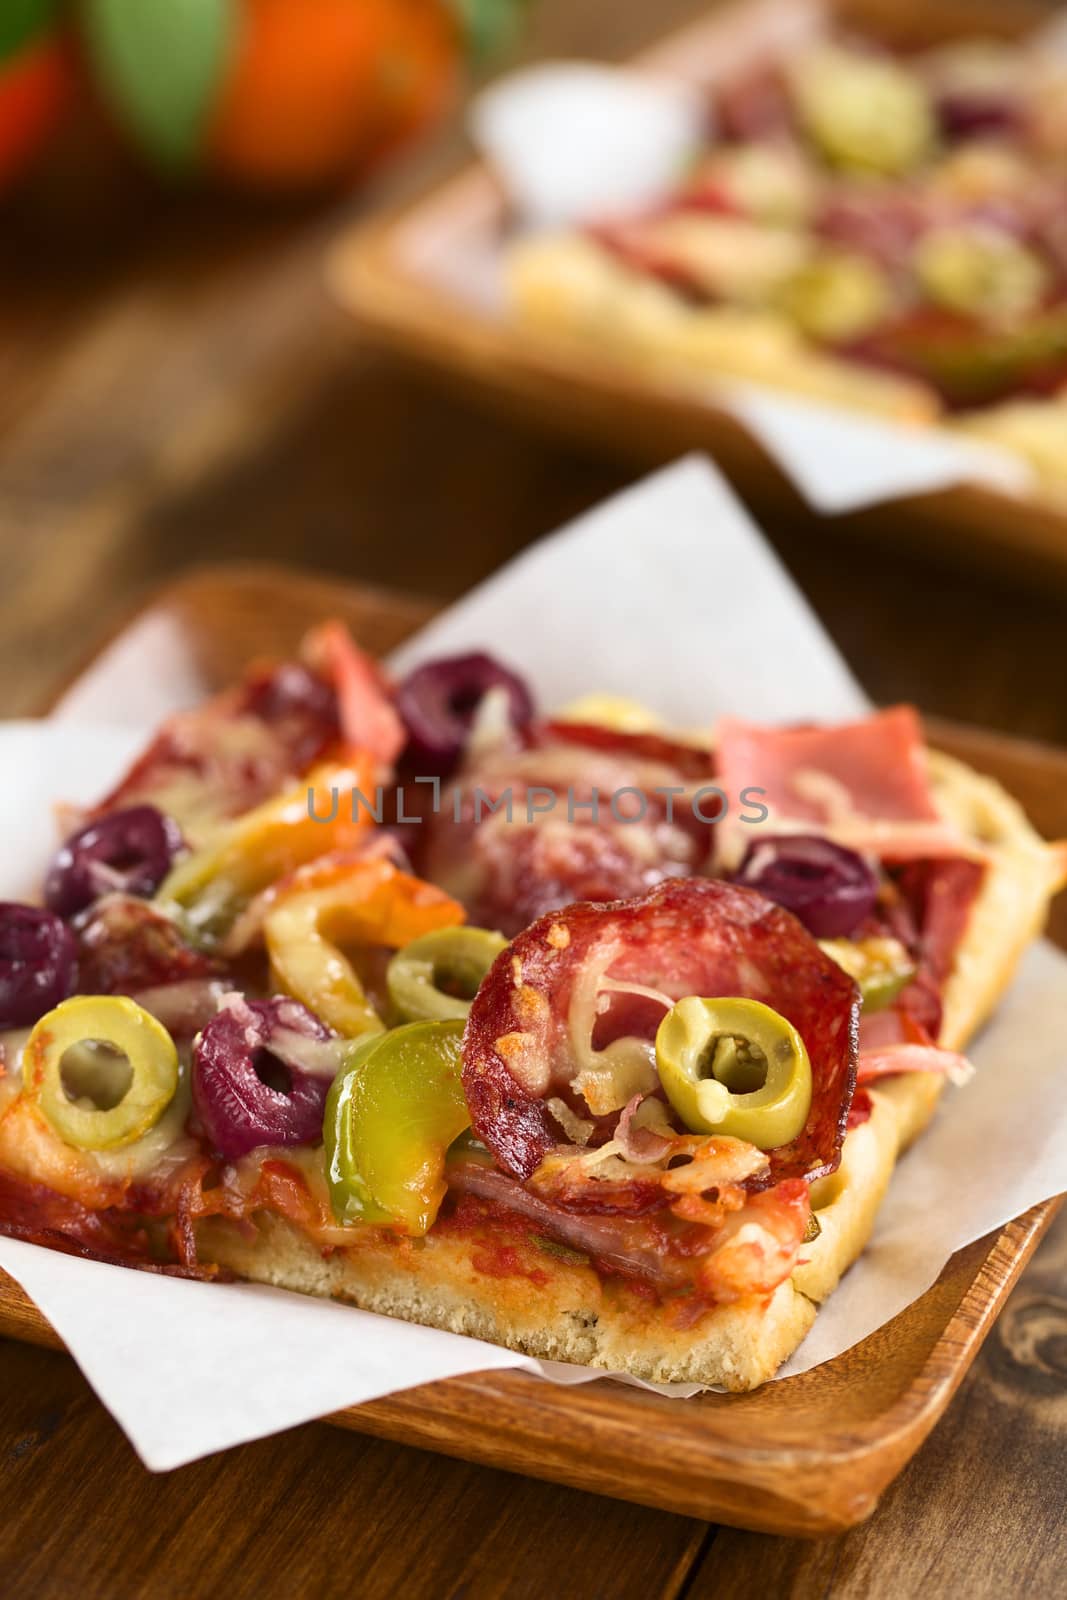 Fresh homemade pizza piece with tomato sauce, ham, salami, olives, bell pepper and cheese on top, served on sandwich paper on wooden plate (Selective Focus, Focus on the front of the green olive slice on the right)